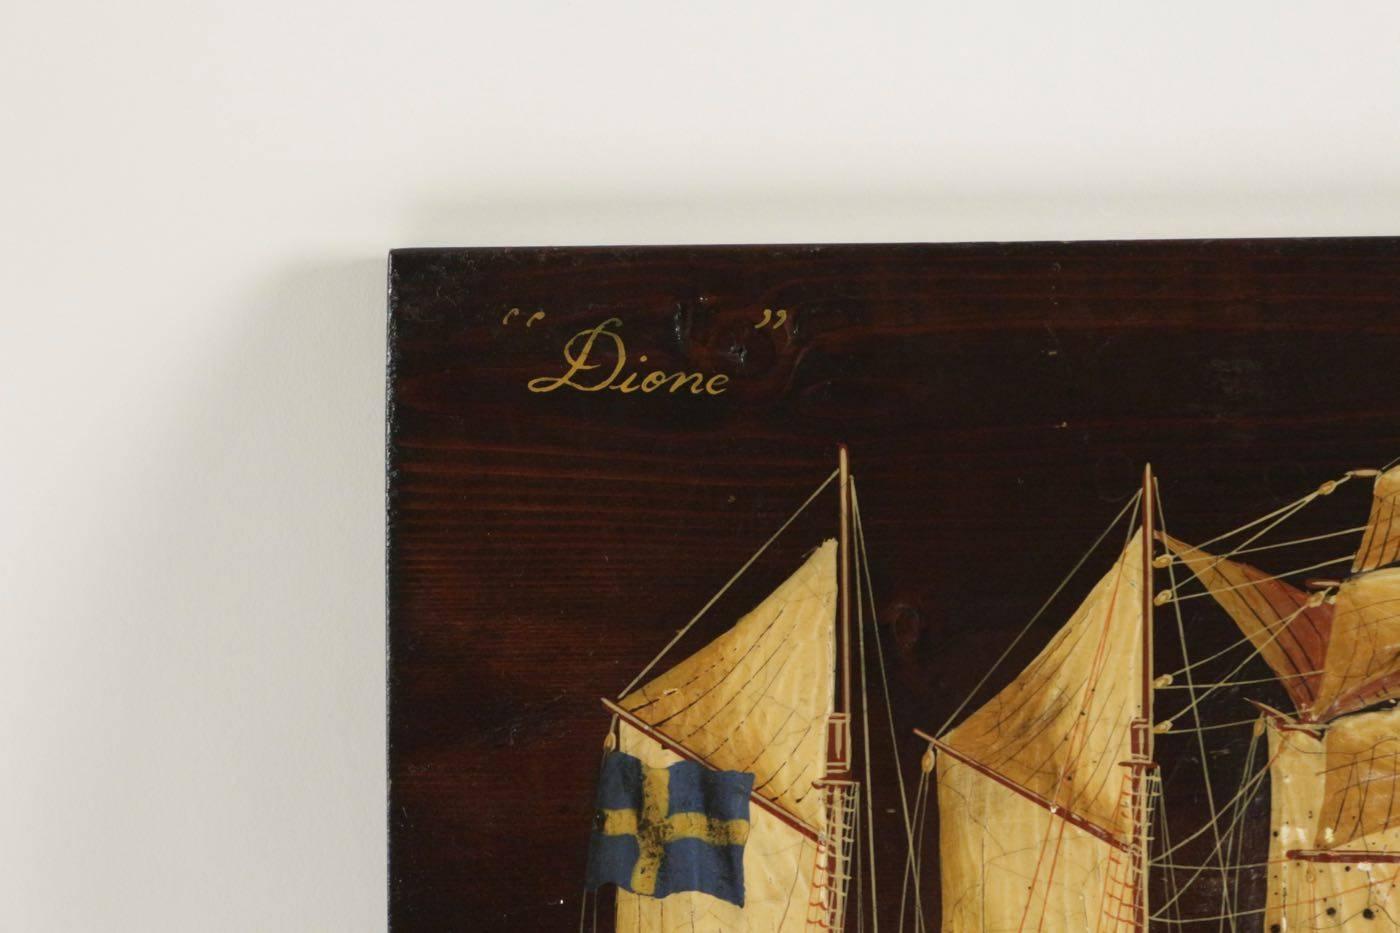 Painting of the Le Dione Goteborg C1903 Done on Wood. h: 26cm, l: 38cm, p: 1cm
